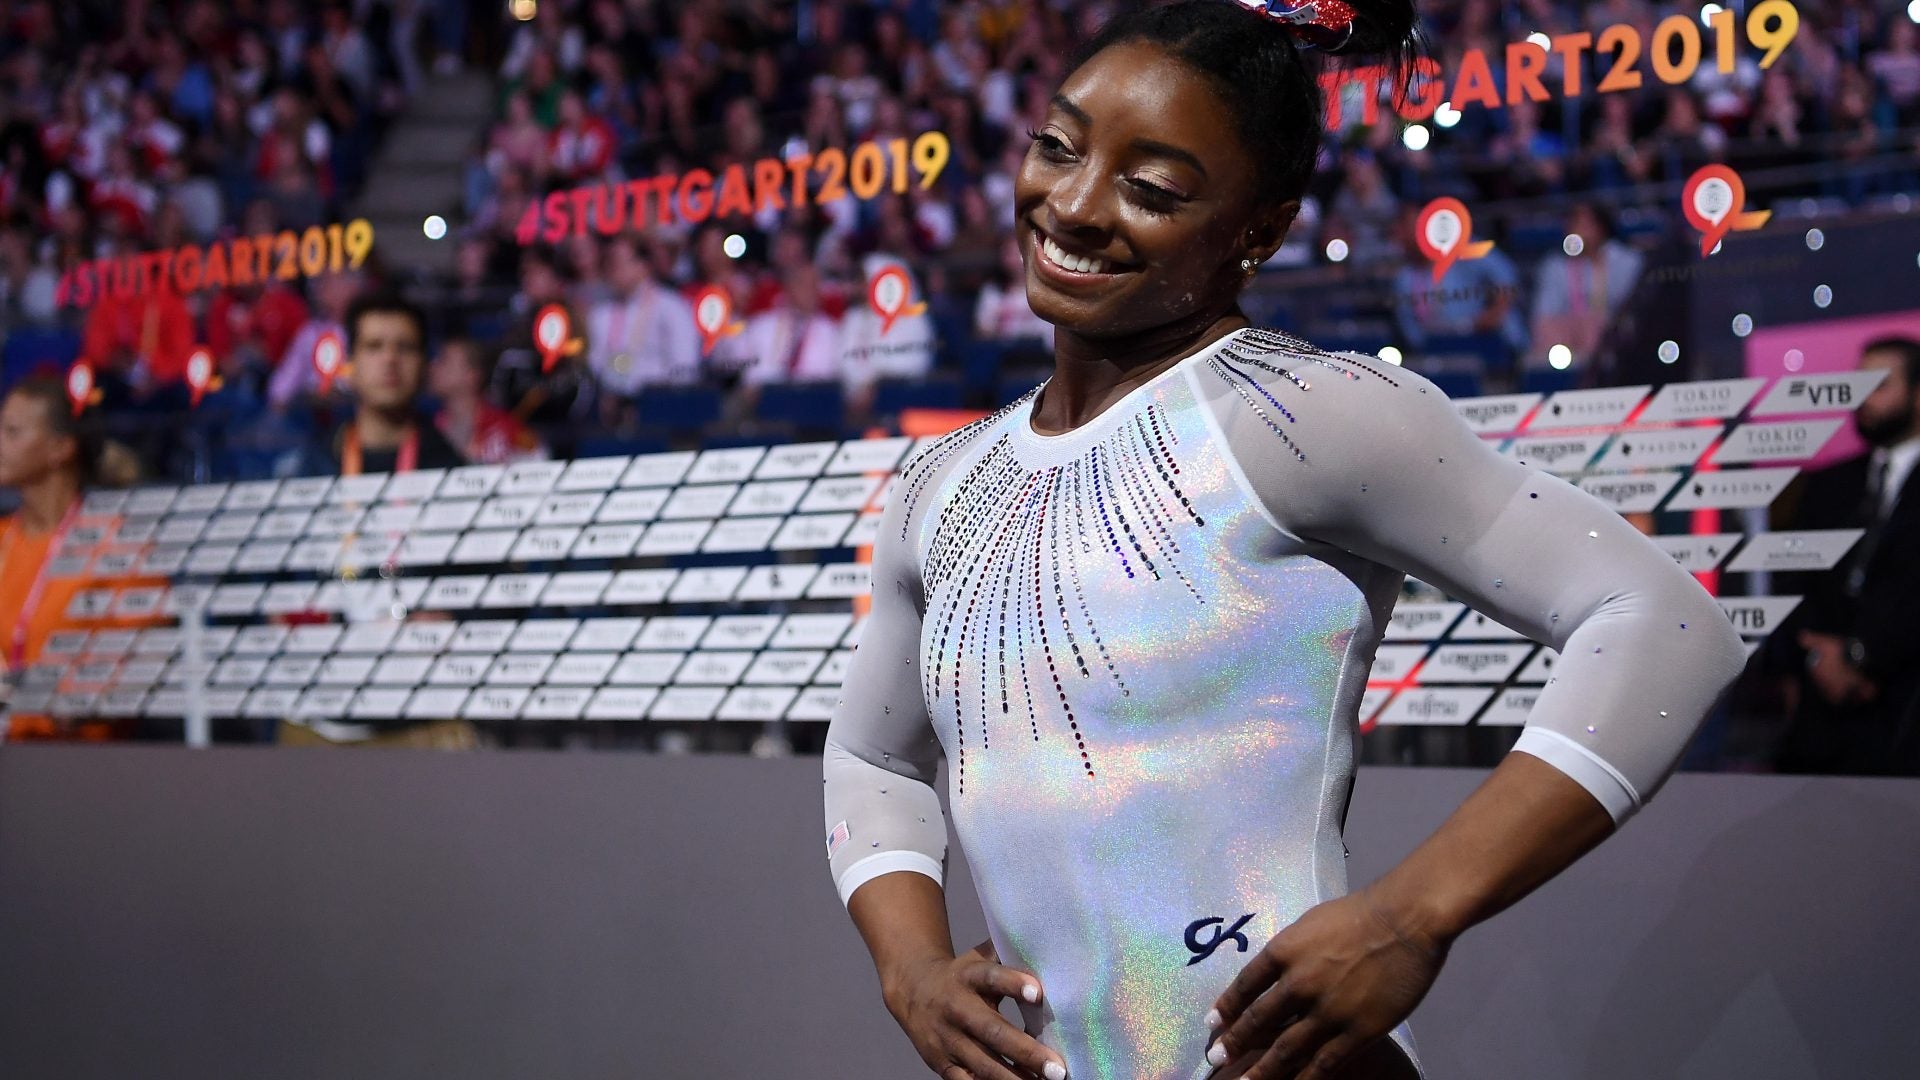 Simone Biles Says 'The Pain Is Real' After New Report Shows U.S. Gymnastics Didn't Investigate Her Abuse By Larry Nassar